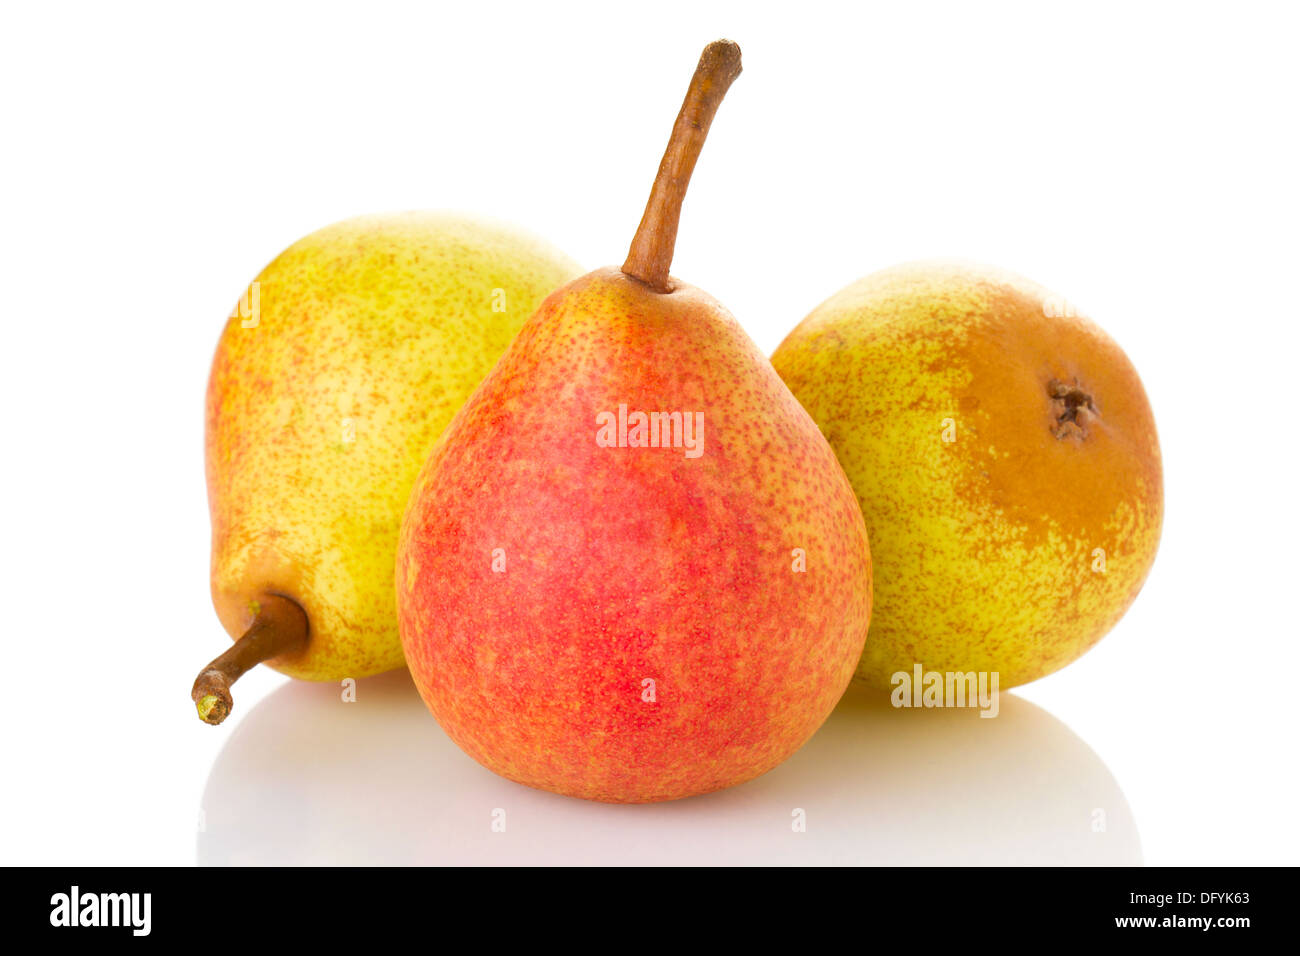 Three ripe pears isolated on white background Stock Photo